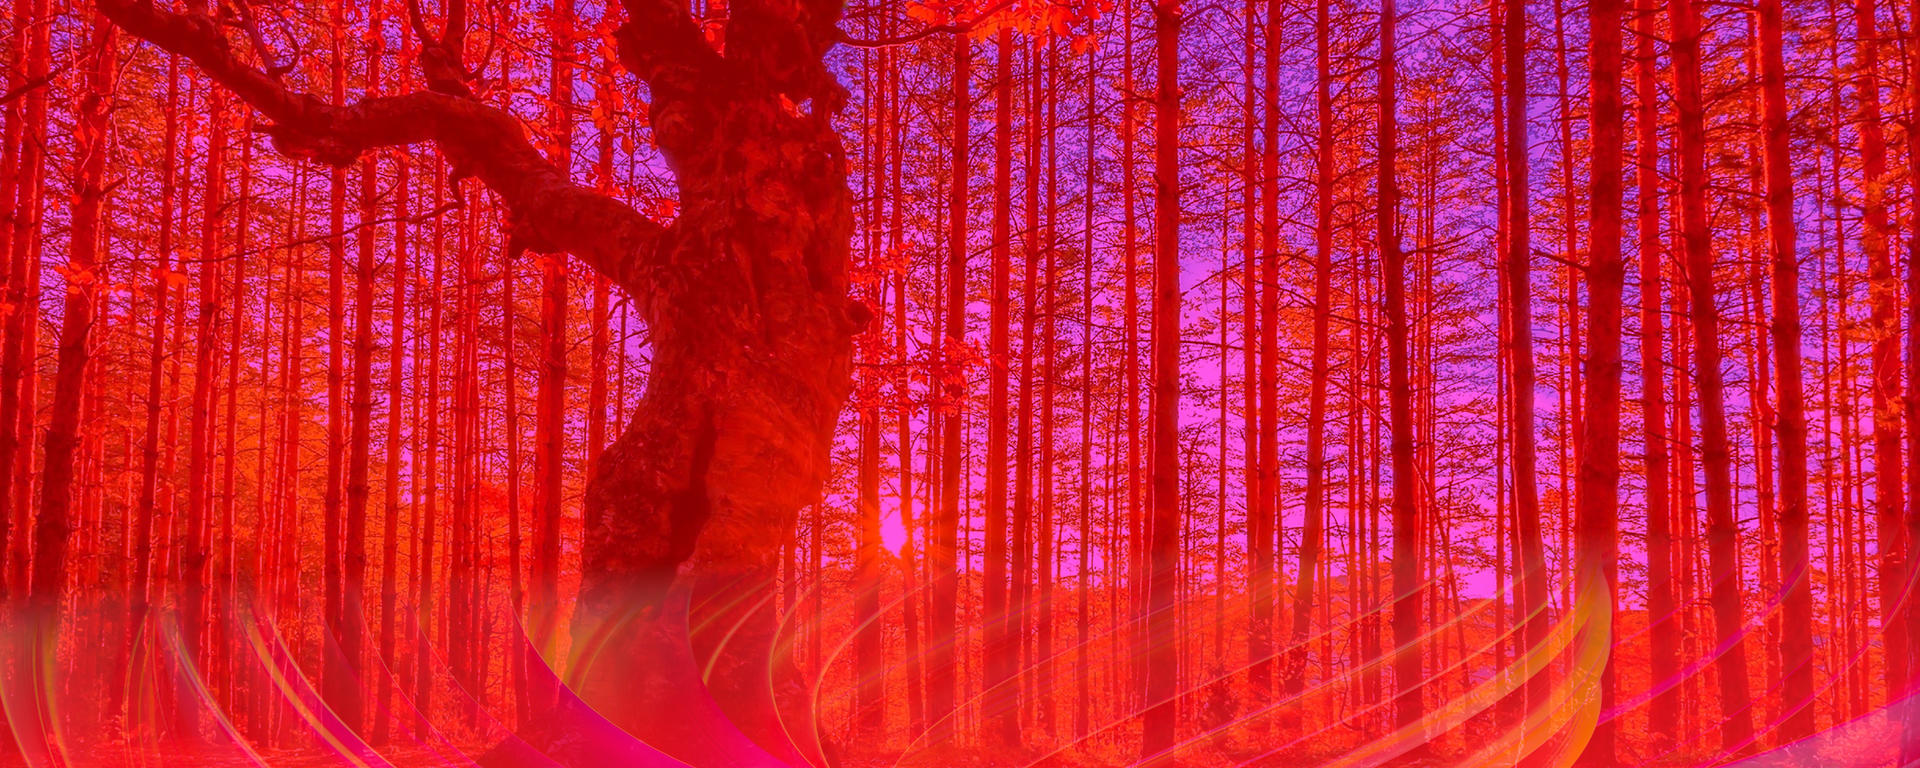 photo of an oak tree in a forest with a red overlay